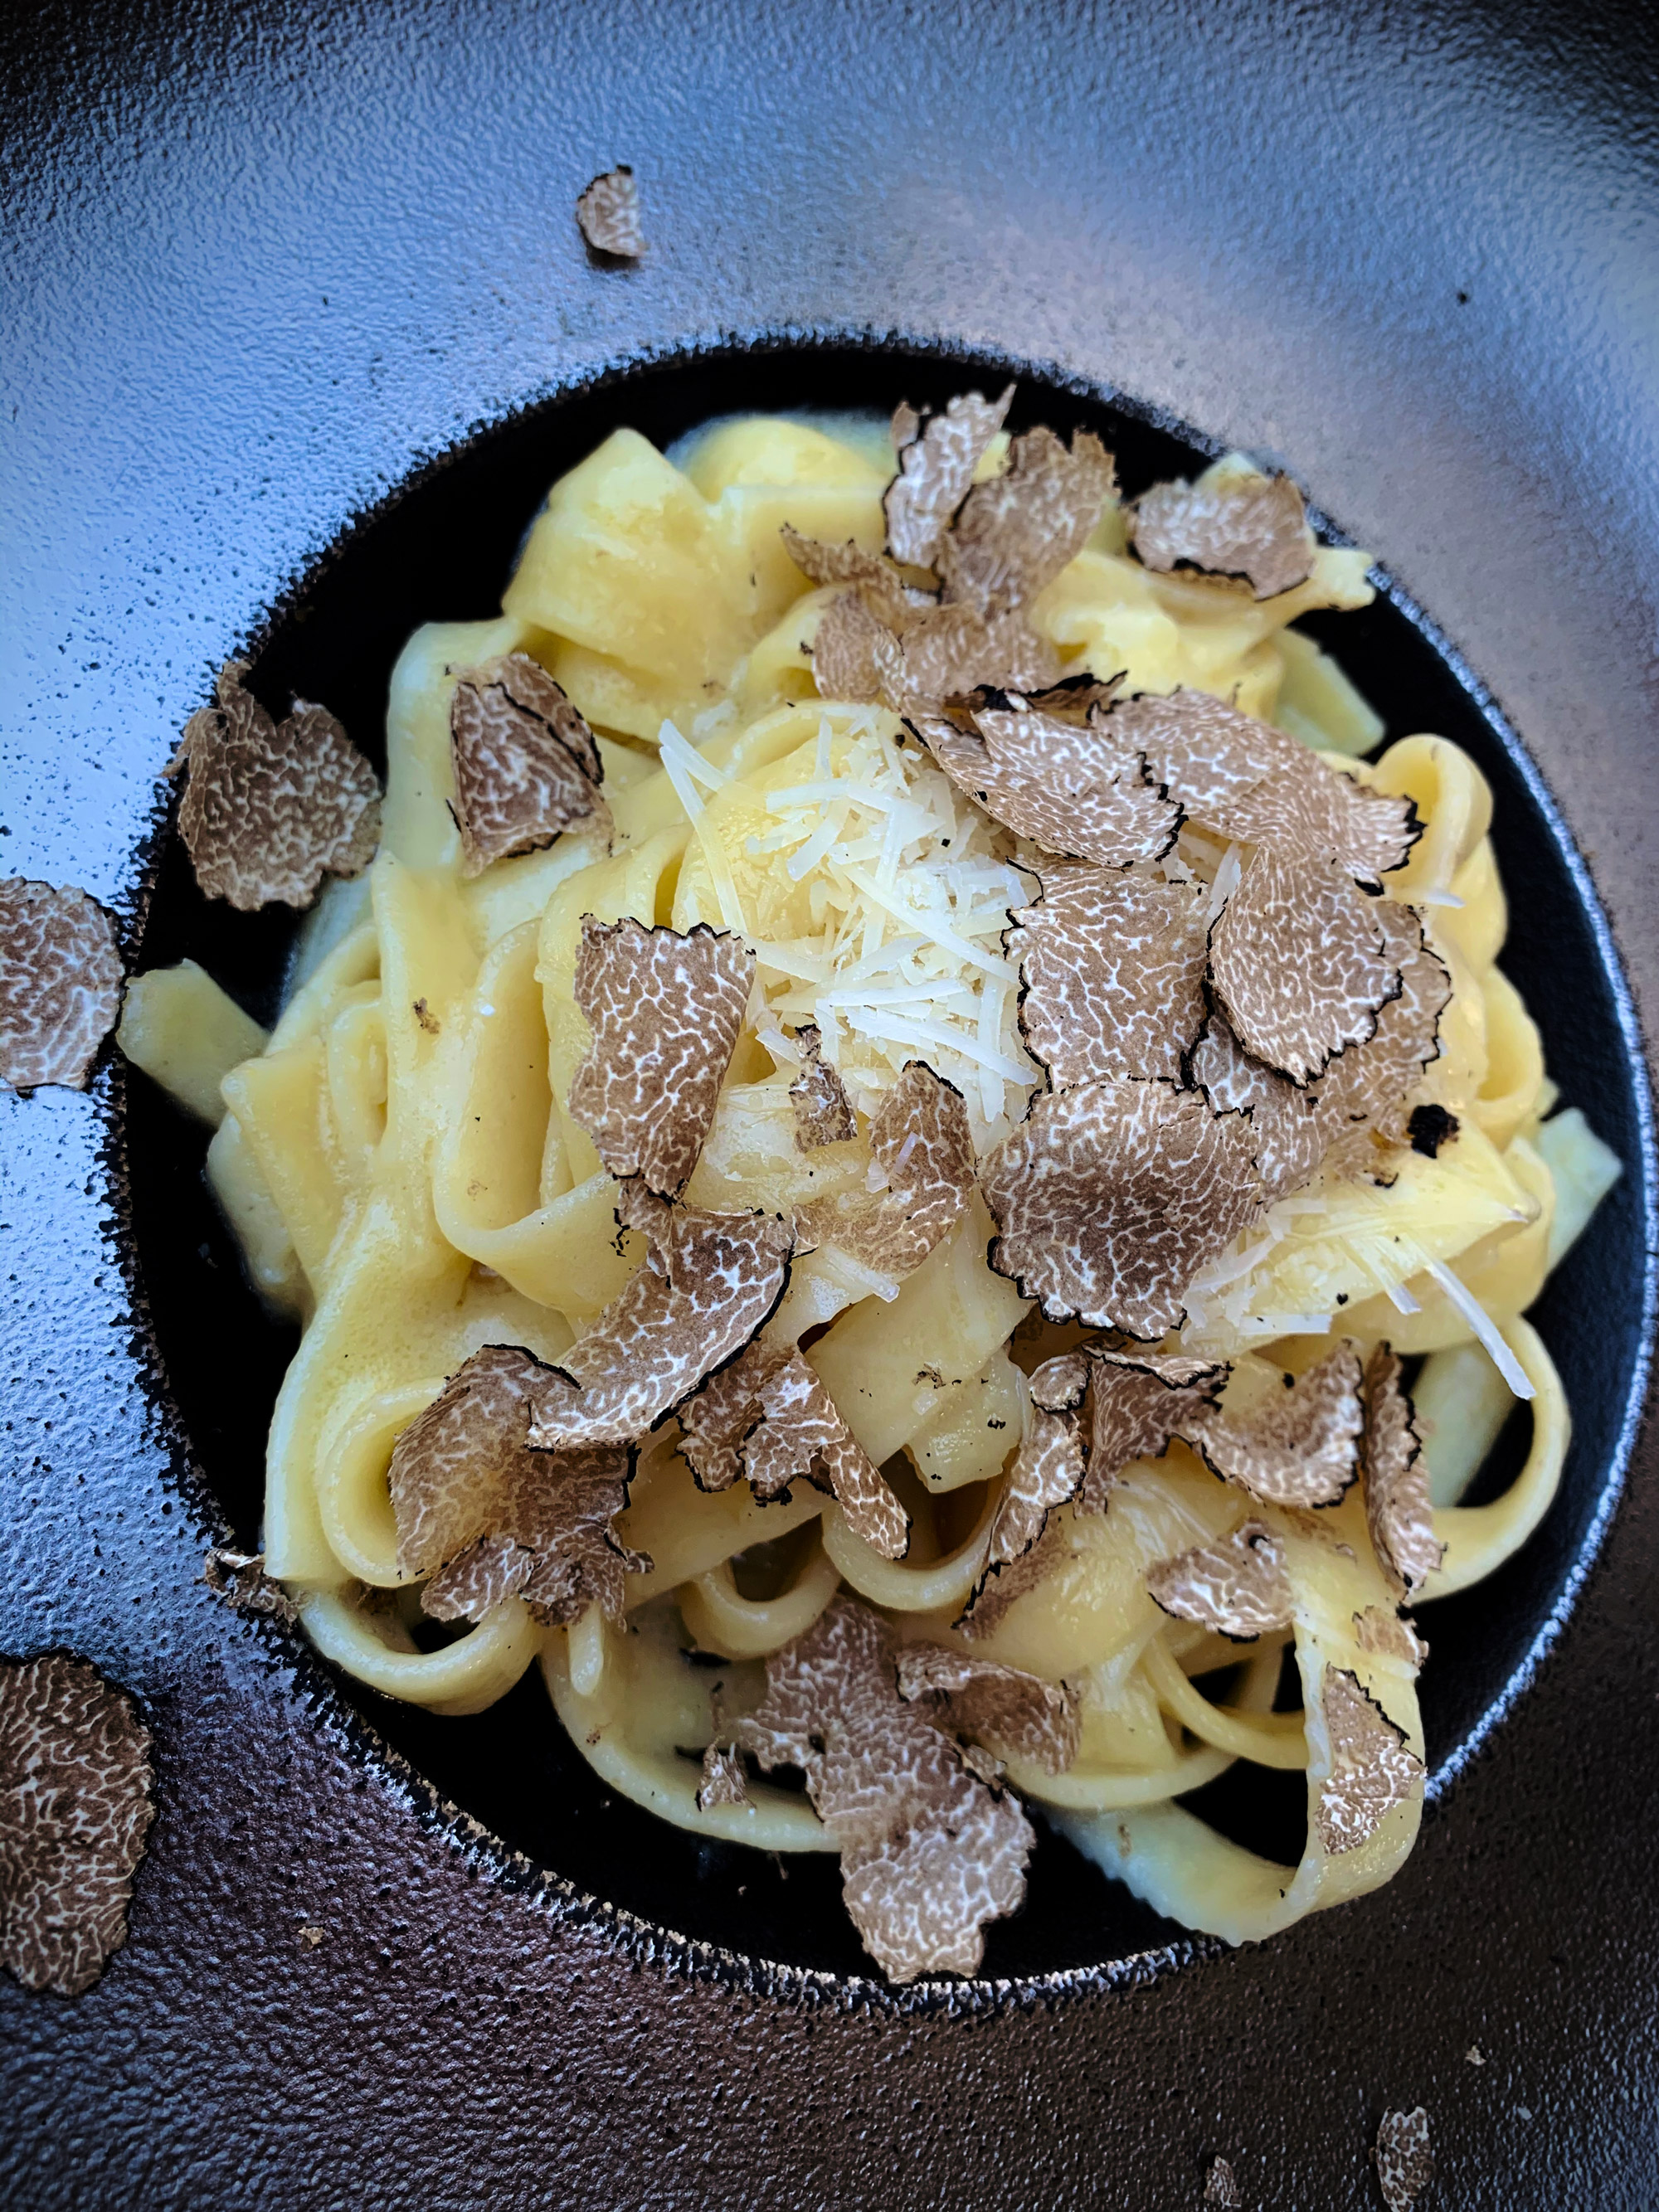 White truffle shaved over bowl of ice cream